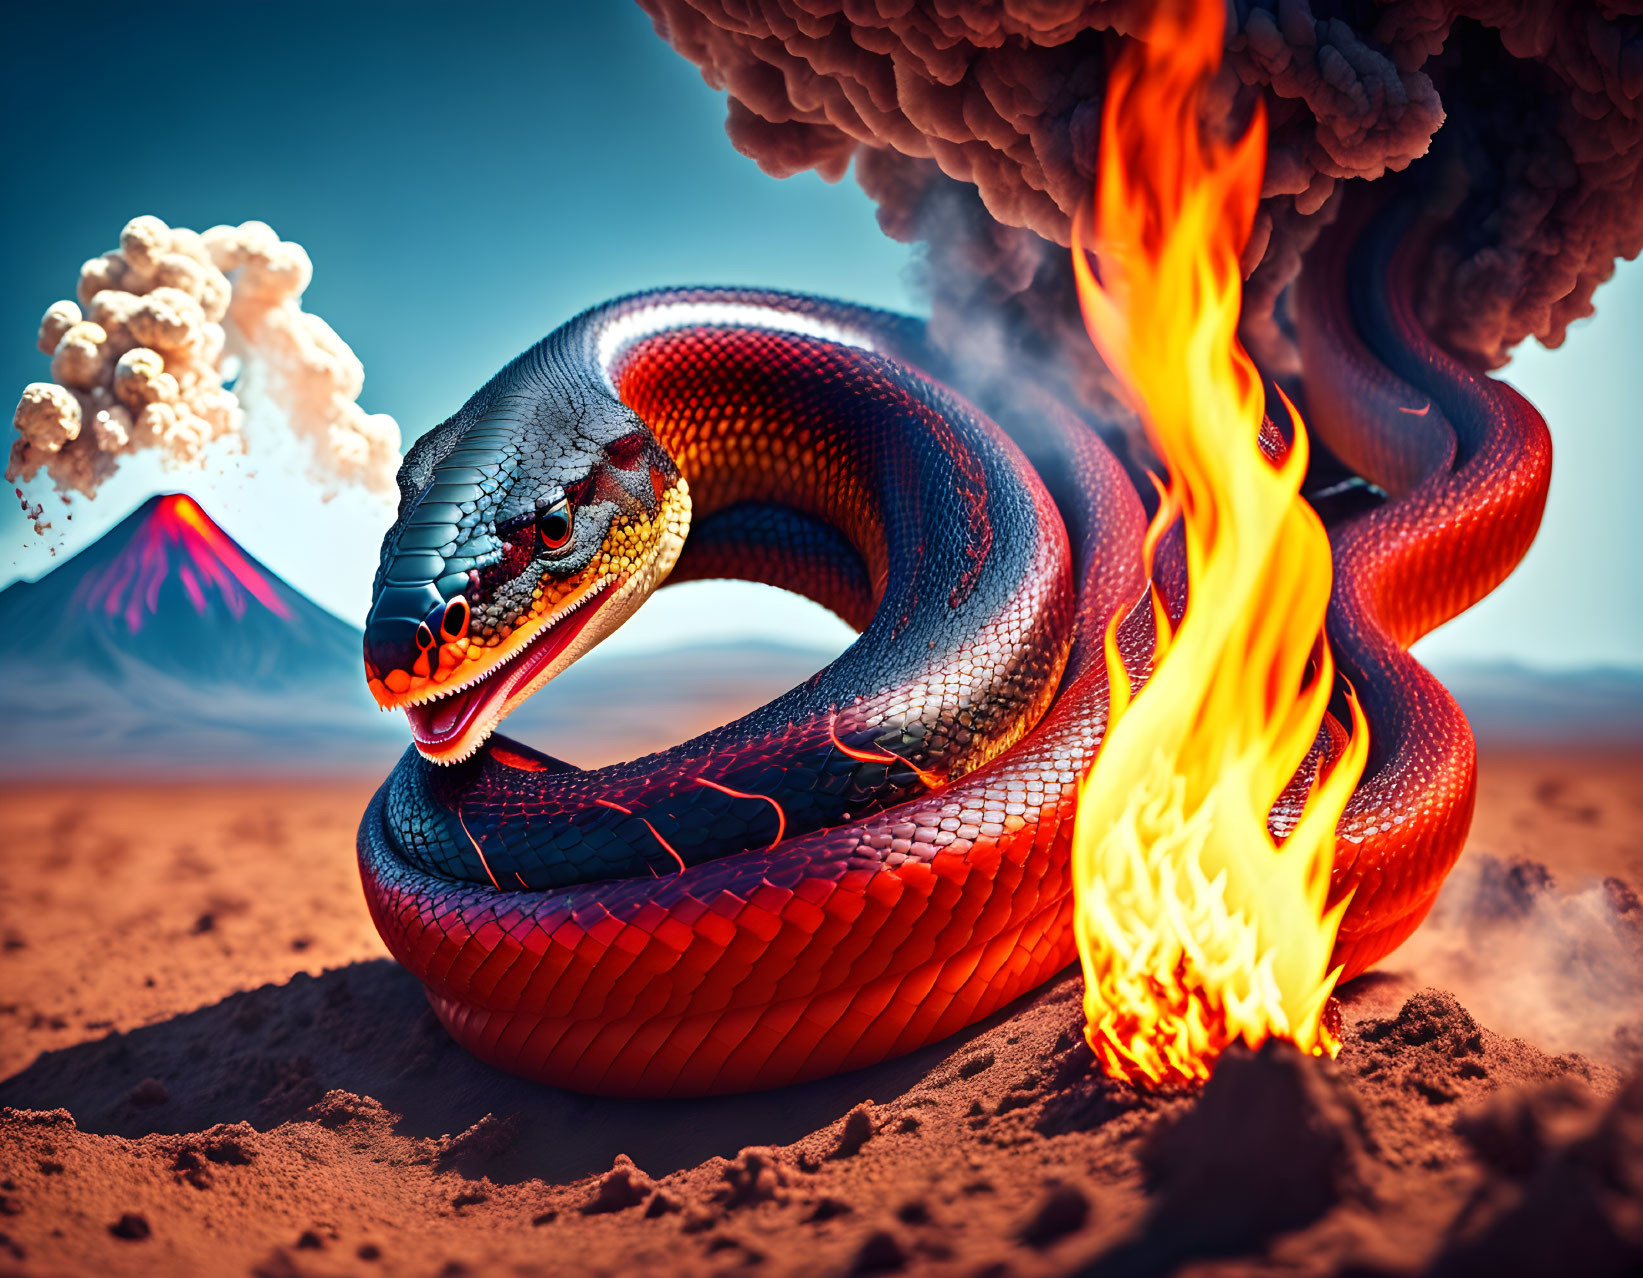 Digital artwork: Fiery serpent with red and black skin in desert with erupting volcano.